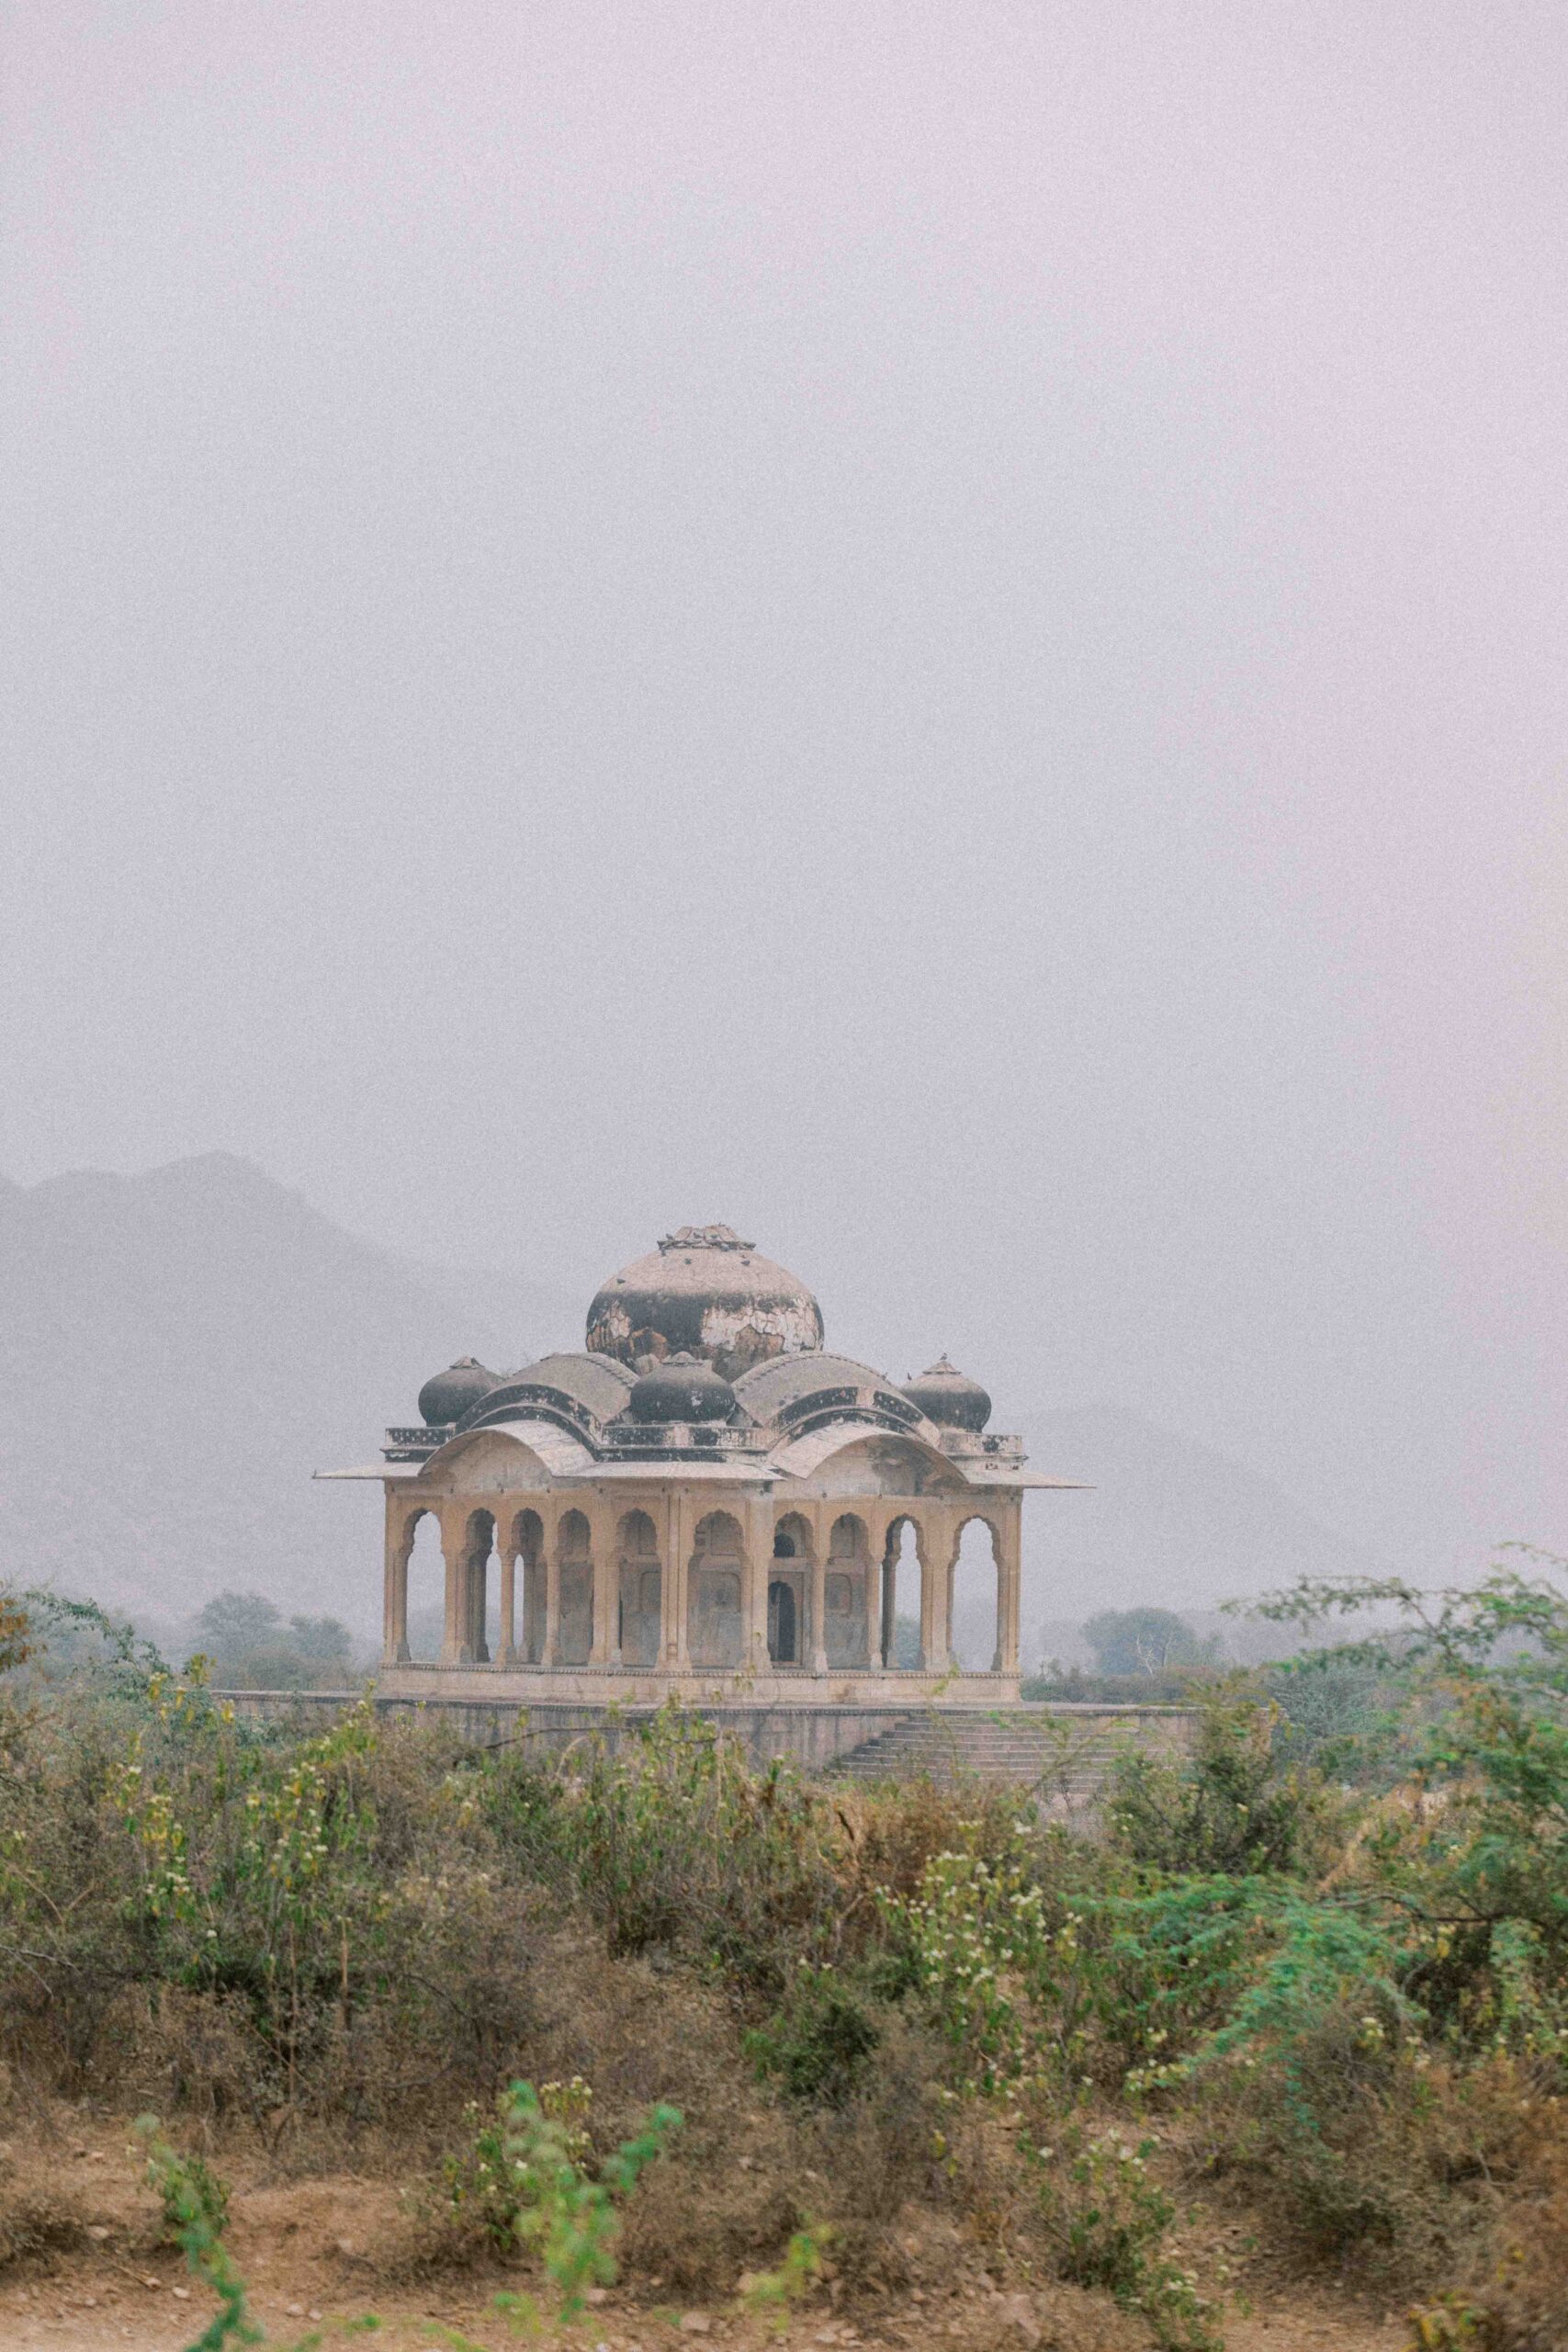 Aman India | Amanbagh | Rajasthan Luxury Travel Guide | Molly Carr Photography